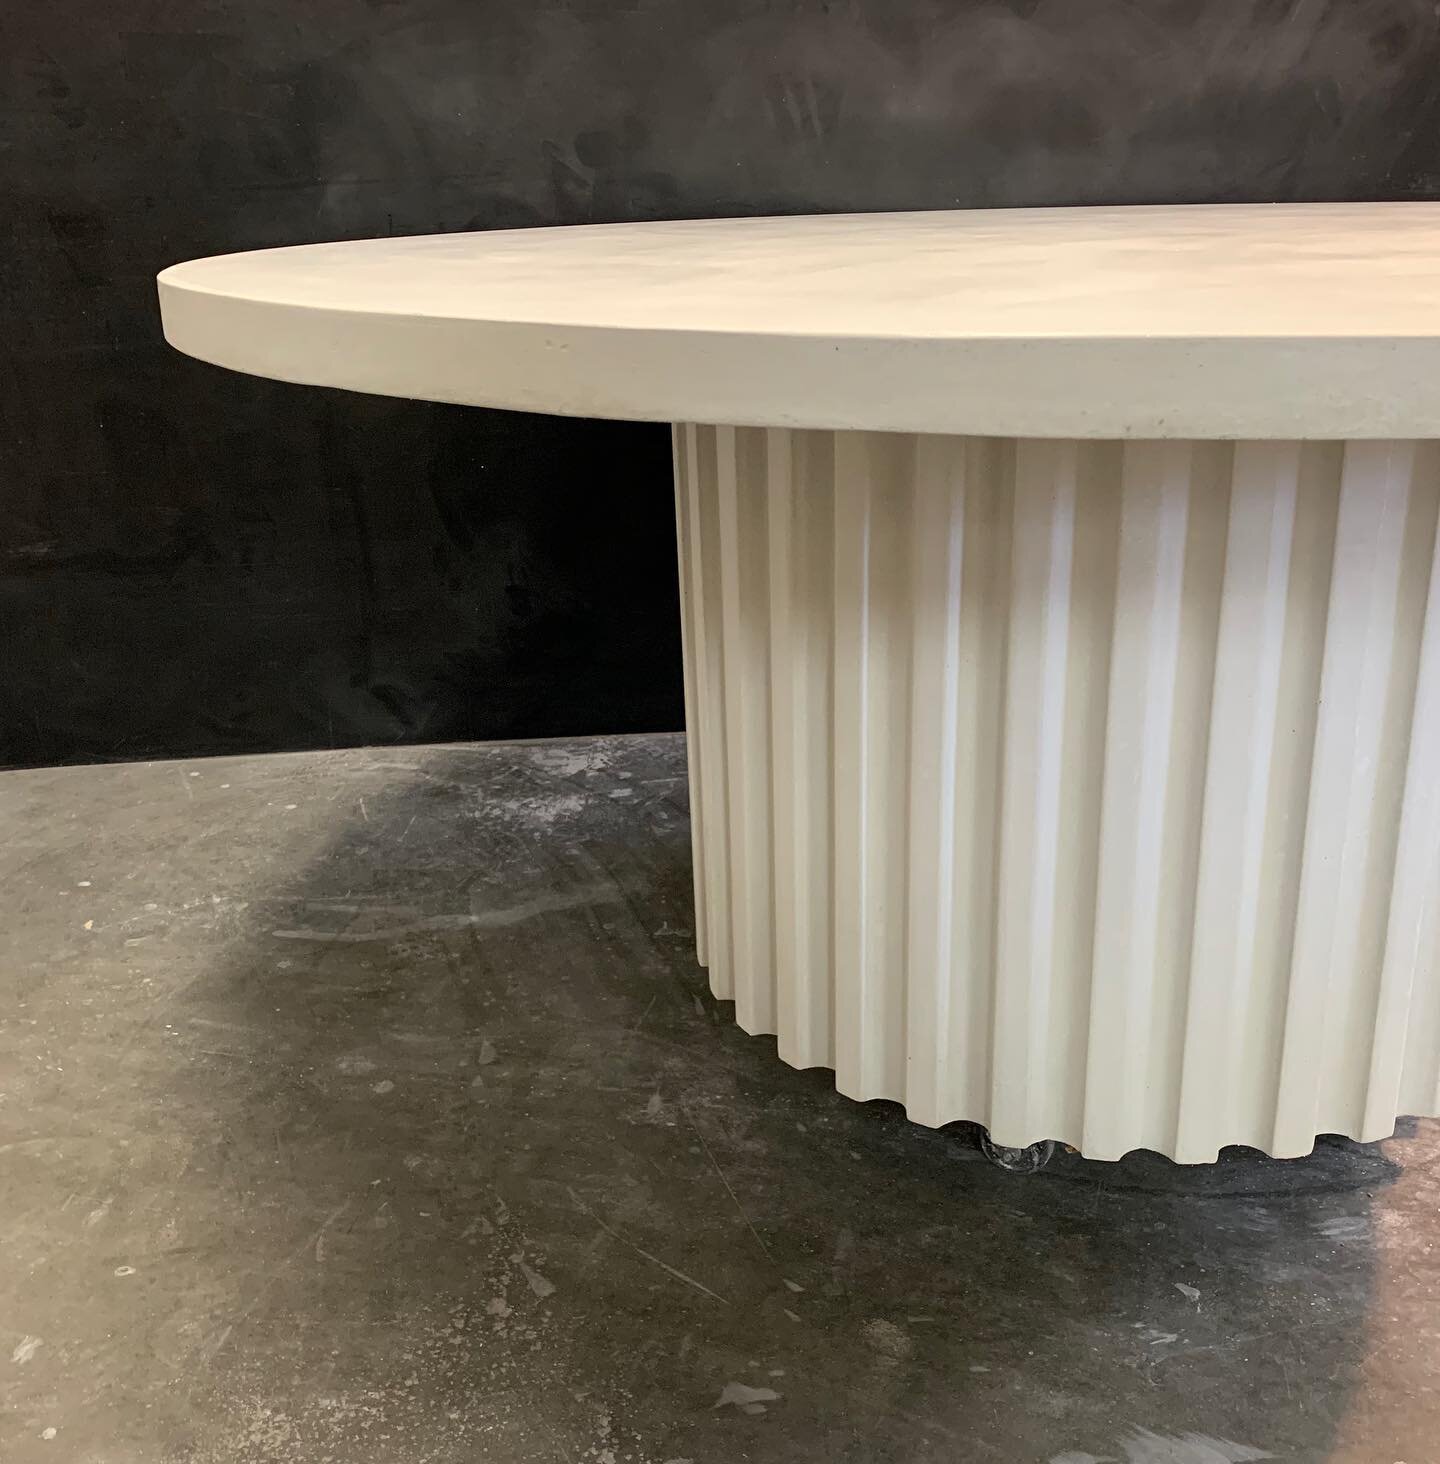 Beautiful custom 72&rdquo; concrete dining table headed out east this week #customfurniture #indooroutdoorfurniture #concretetable #diningtable #customtable #flutedtable #columntable #architecturalcolumn #concretedesign #stogsconcretedesign